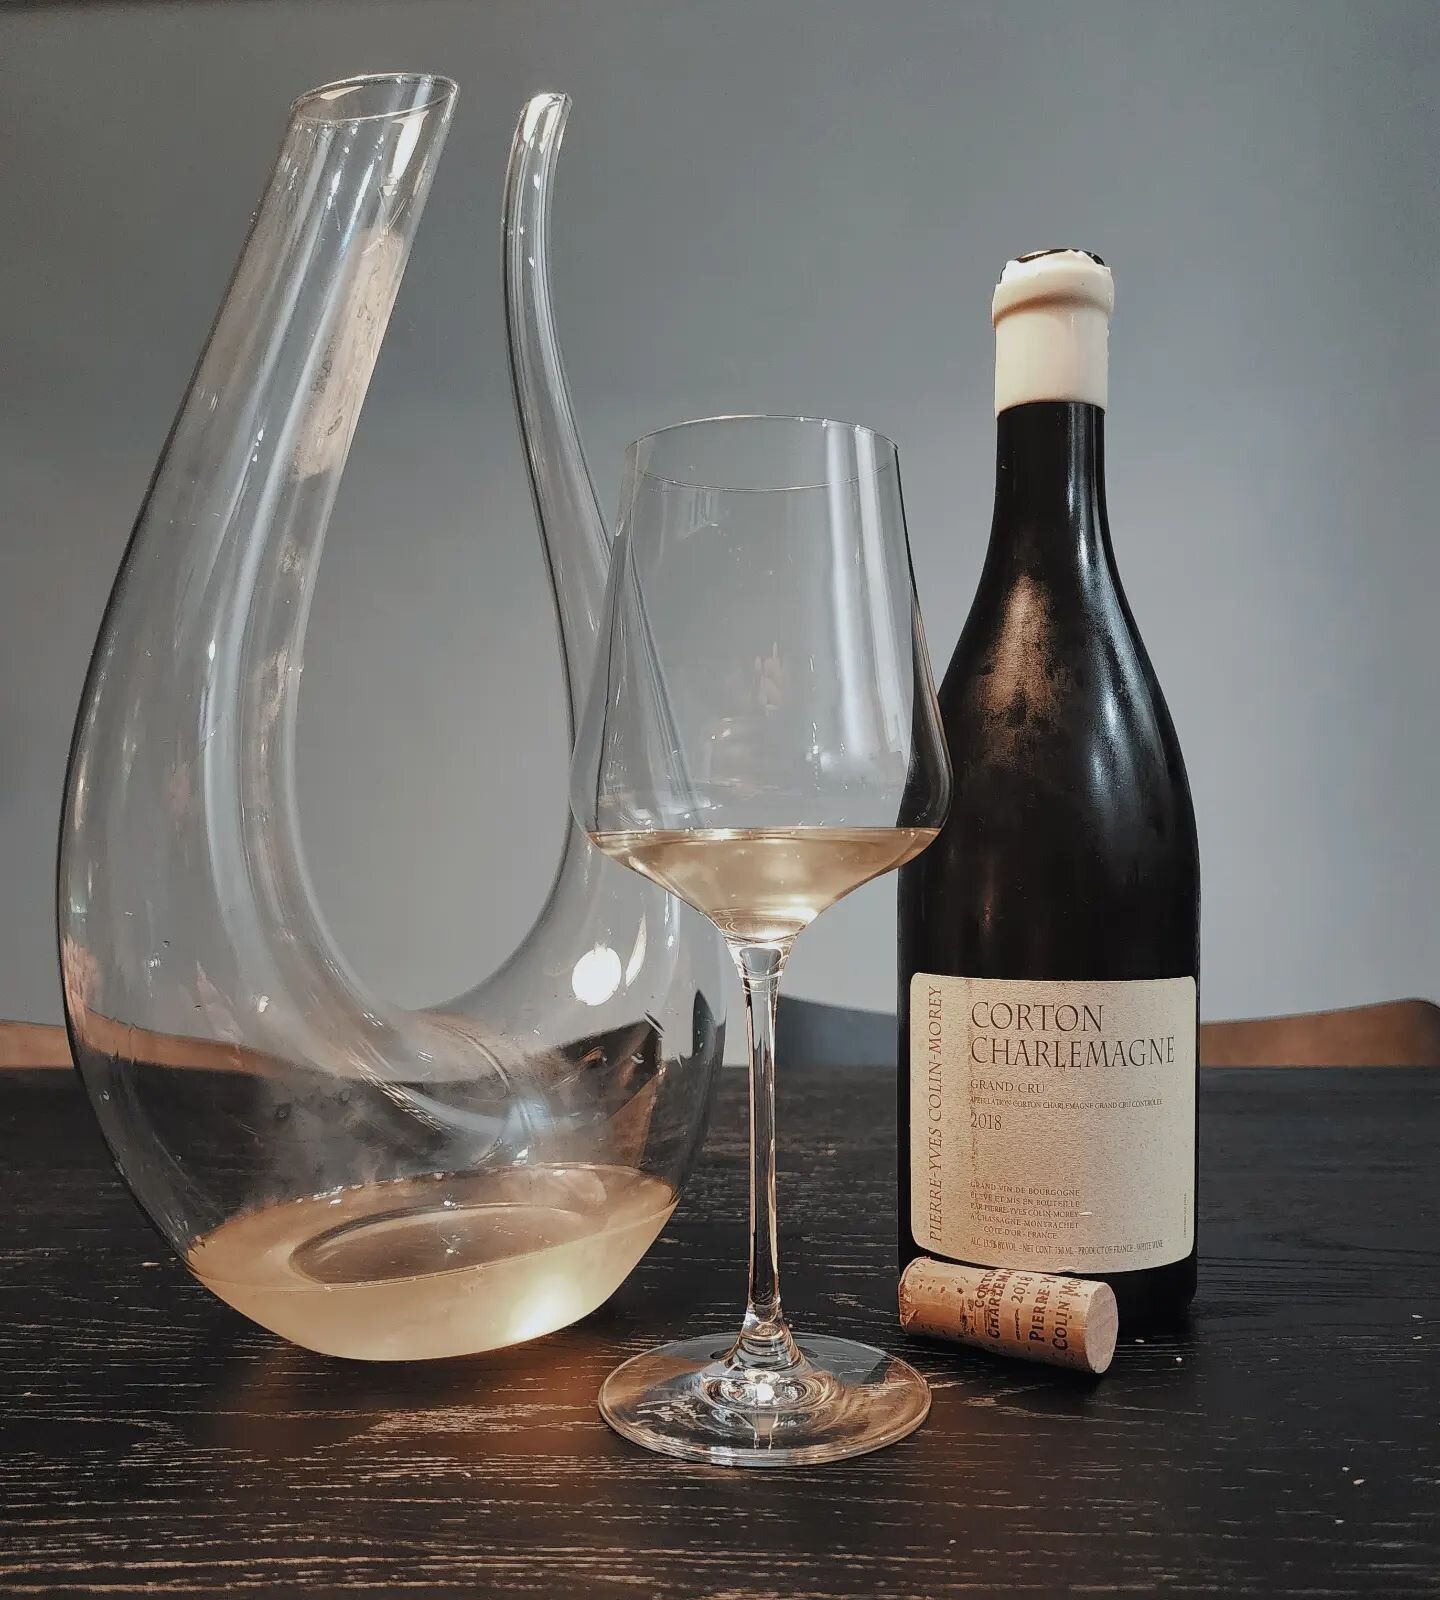 Corton Charlemagne. It's cheek-clenching tight with stunning mineral prowess and superb palate weight and richness. There's a subtlety to the aroma with a perfume of underlying smoke, white tea, salinity, crushed stone, and leatherwood honey. On the 